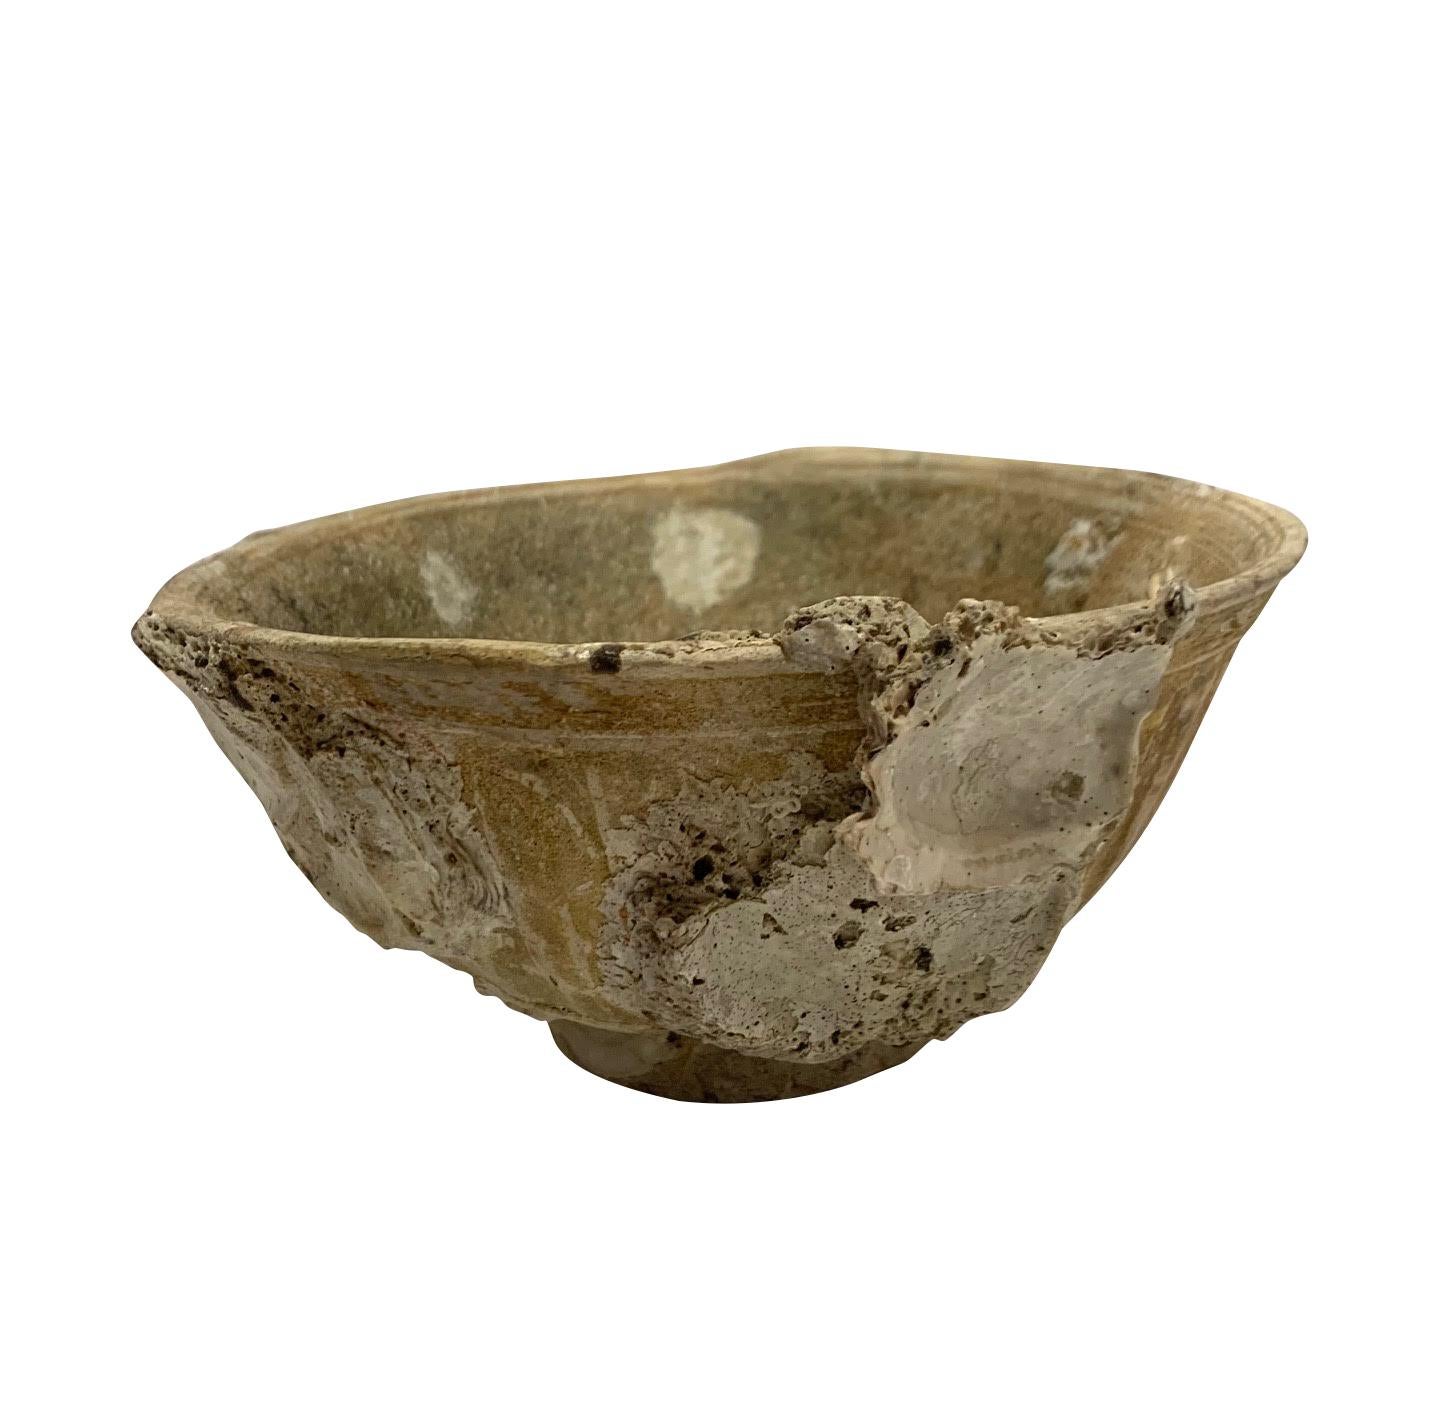 16th century Thailand ceramic bowl from Sawankhalok.
Discovered from a ship wreck.
Beautiful natural weathered patina.
Part of a large collection.
Sold individually.